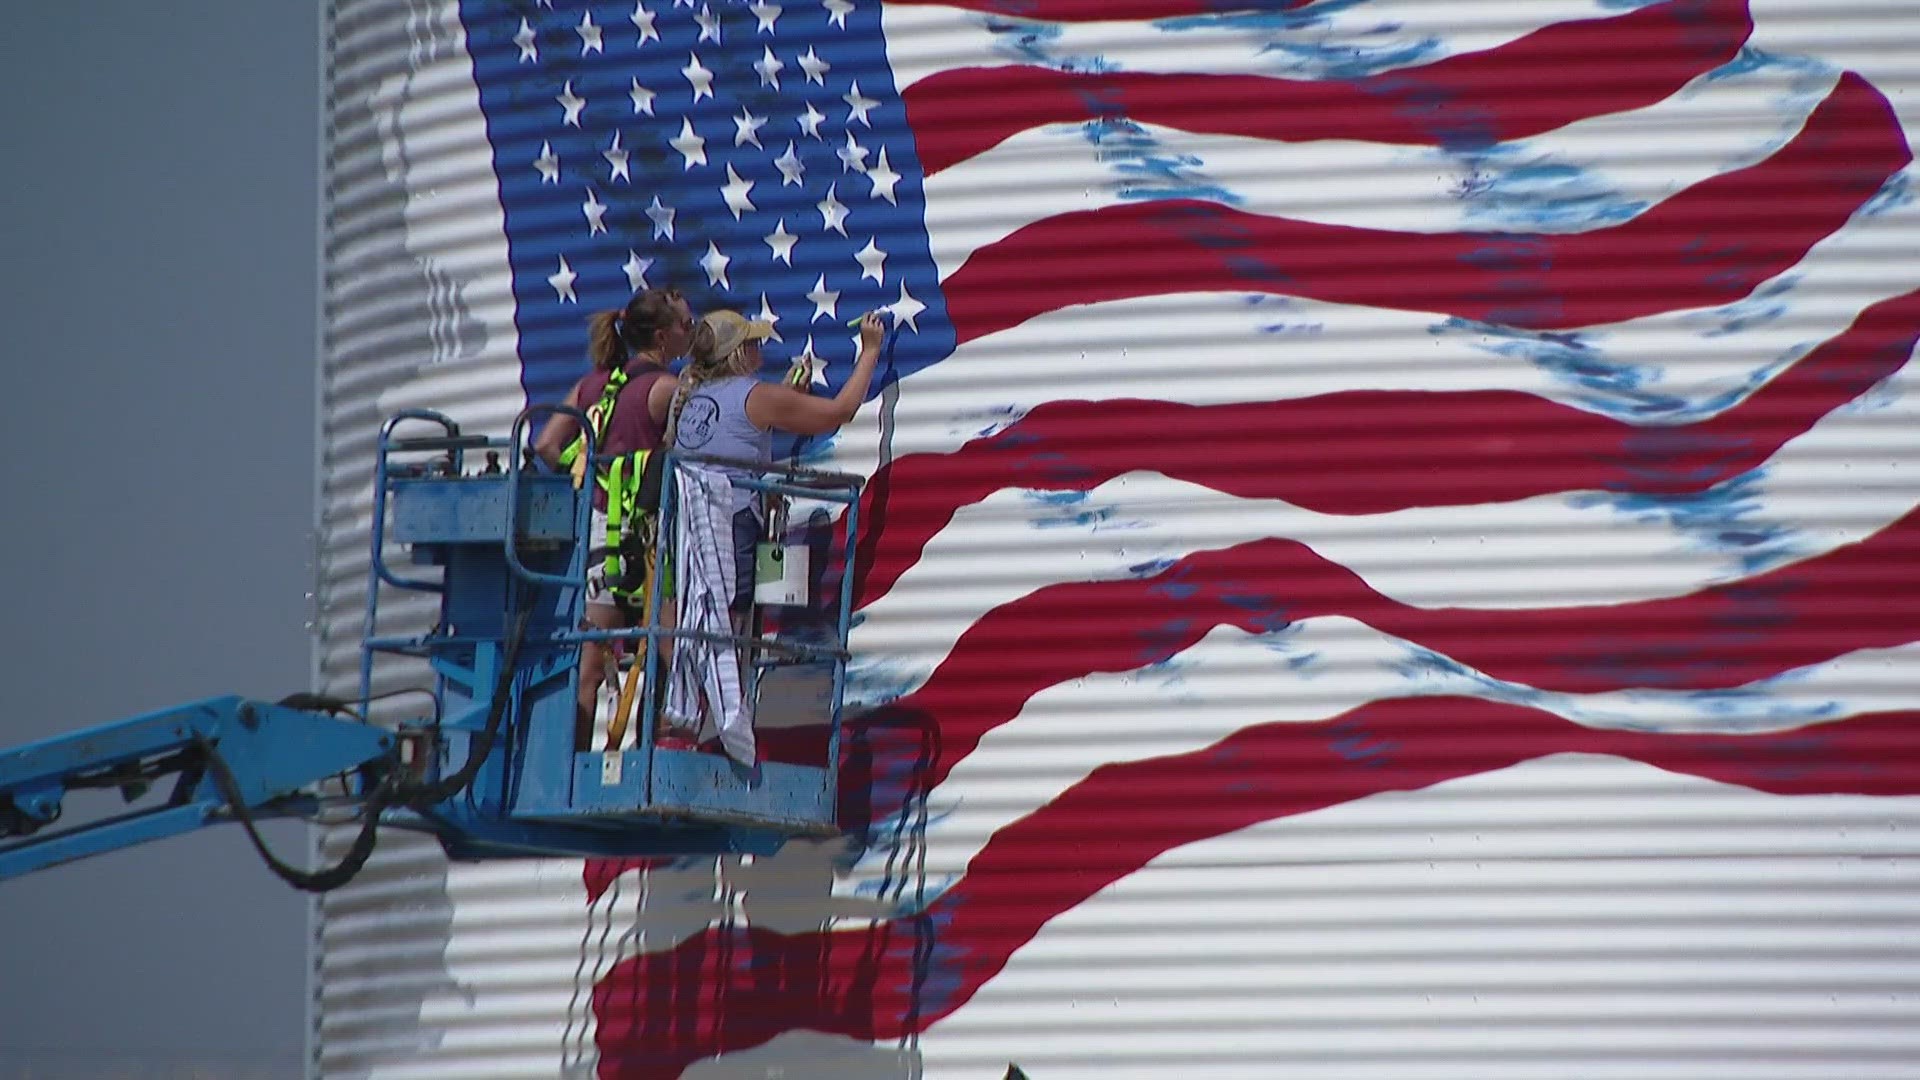 Two cousins have found success in taking their mural business far from the buildings and alleyways of Denver, to the grain bins and barns of Eastern Colorado.